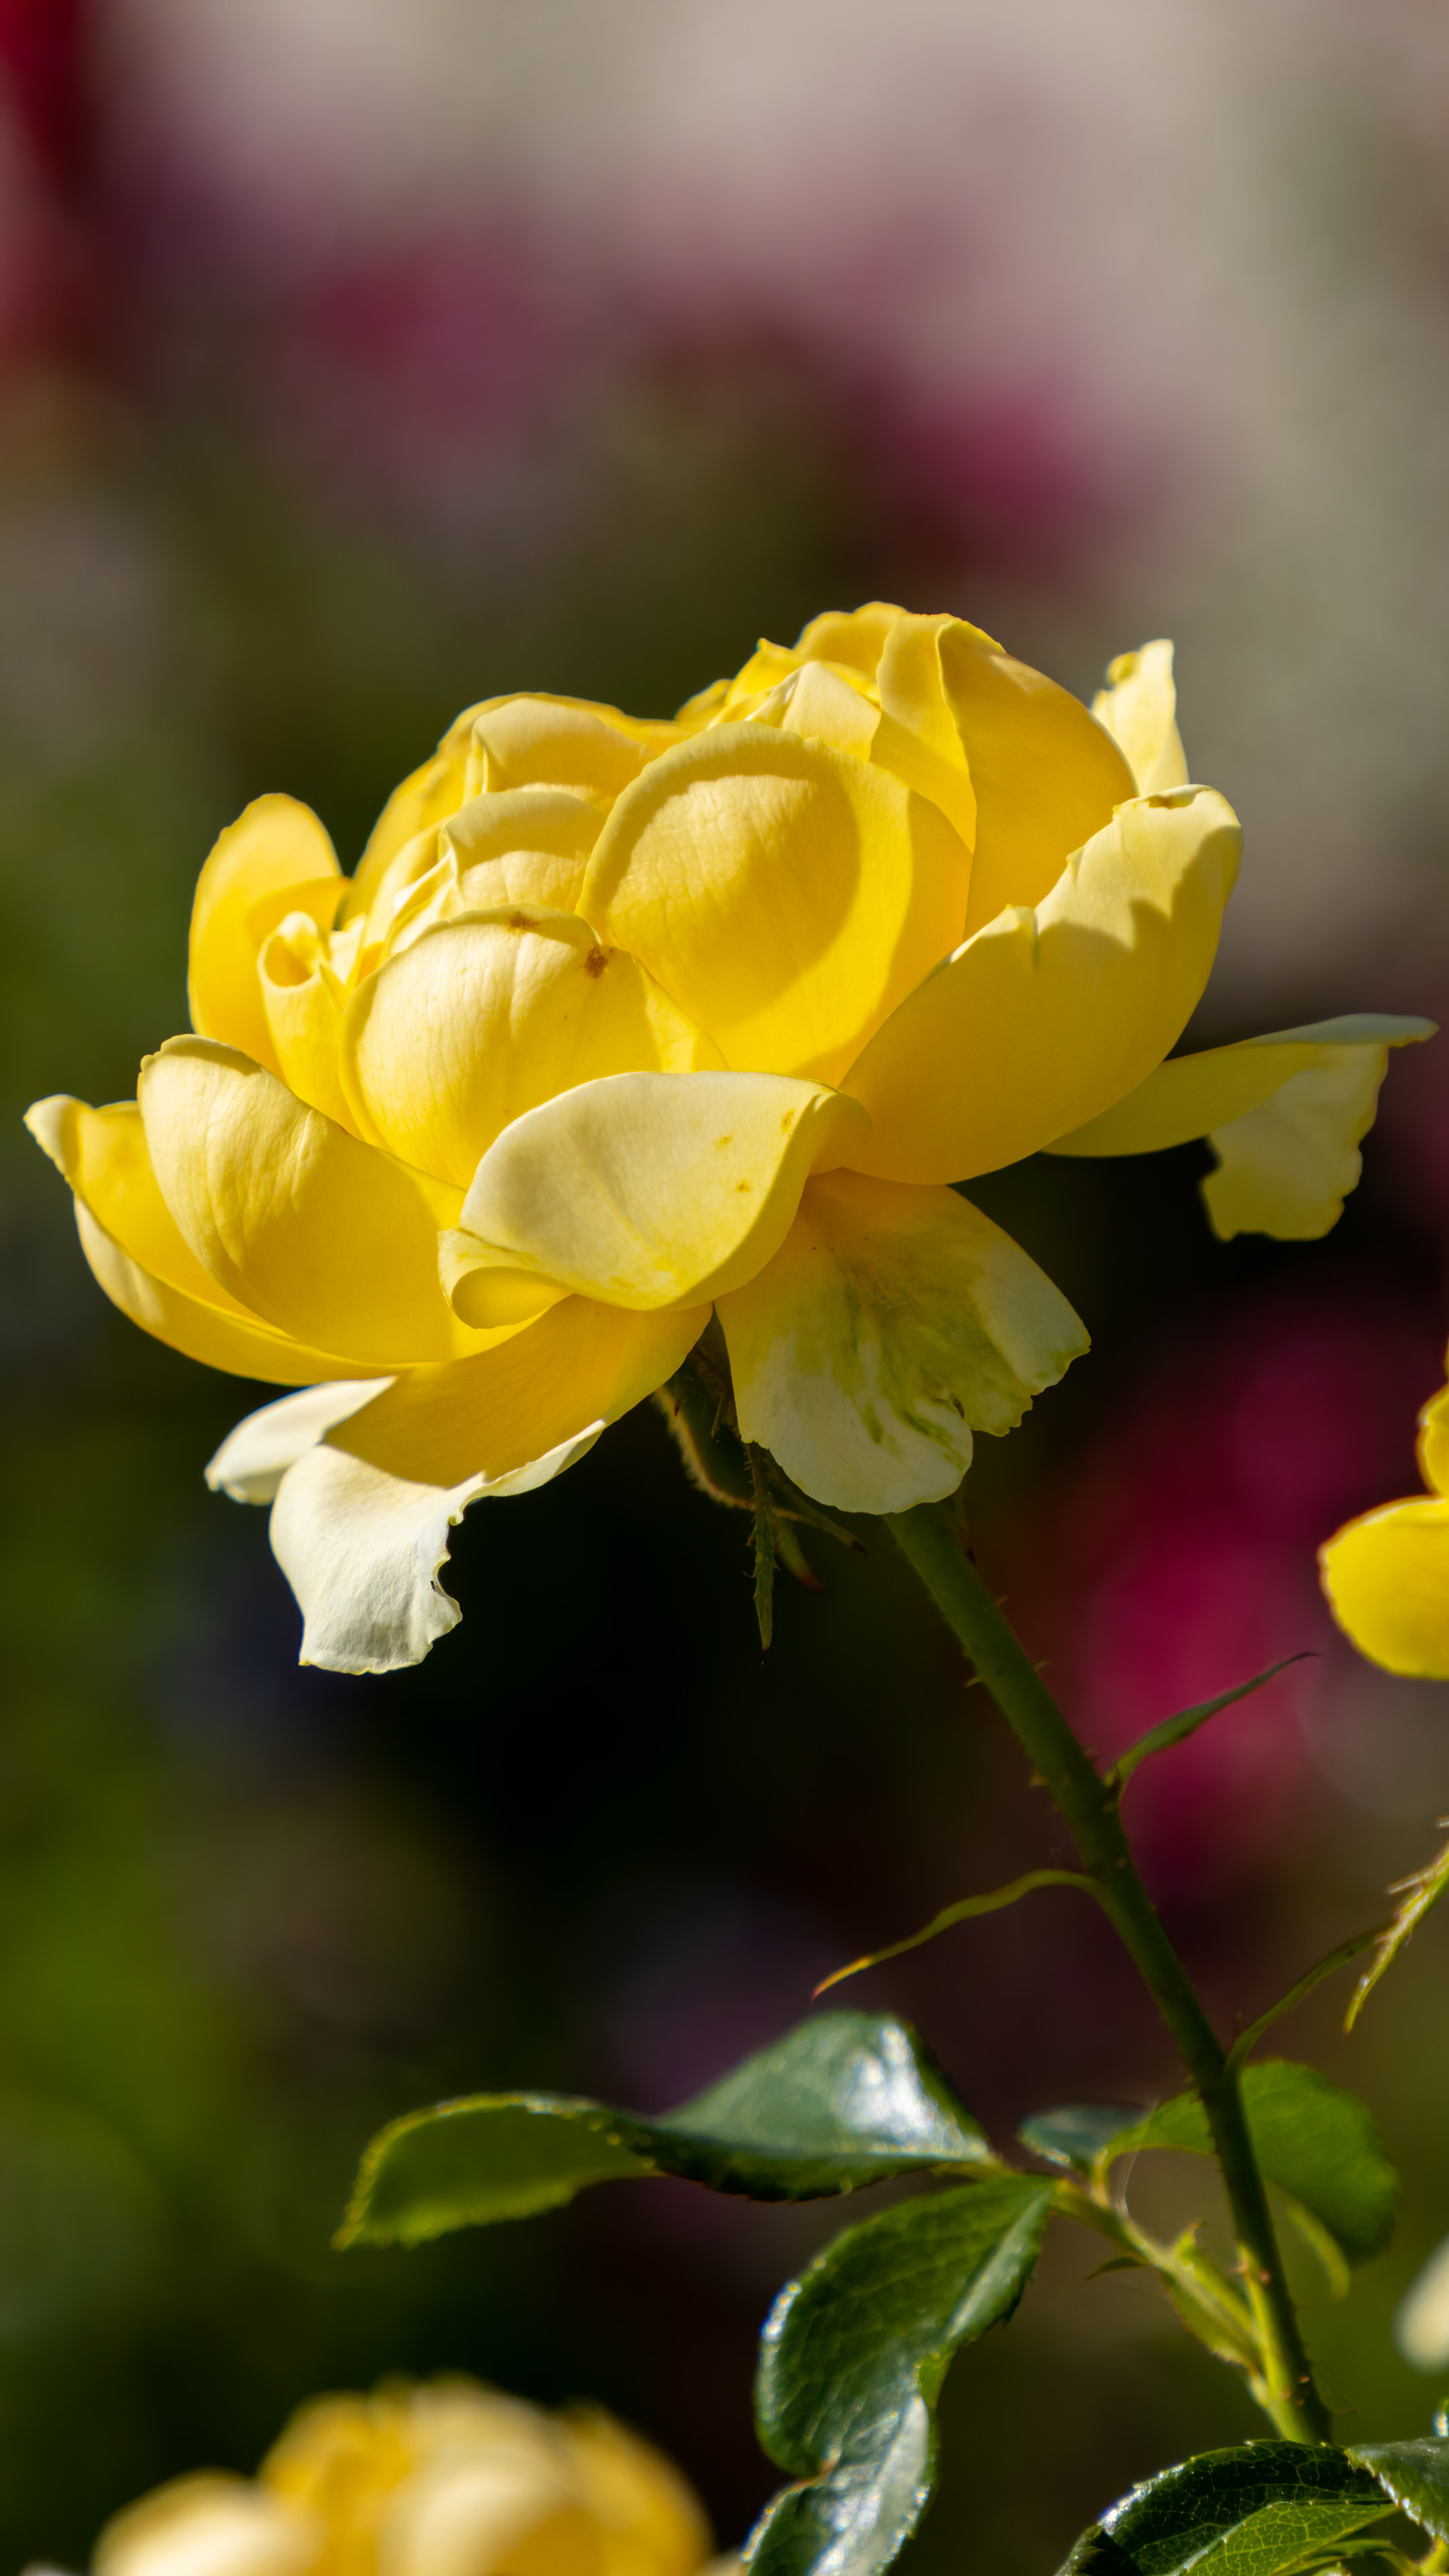 Immerse yourself in the brilliance of nature with our ultra HD yellow rose flower wallpaper in 4K.